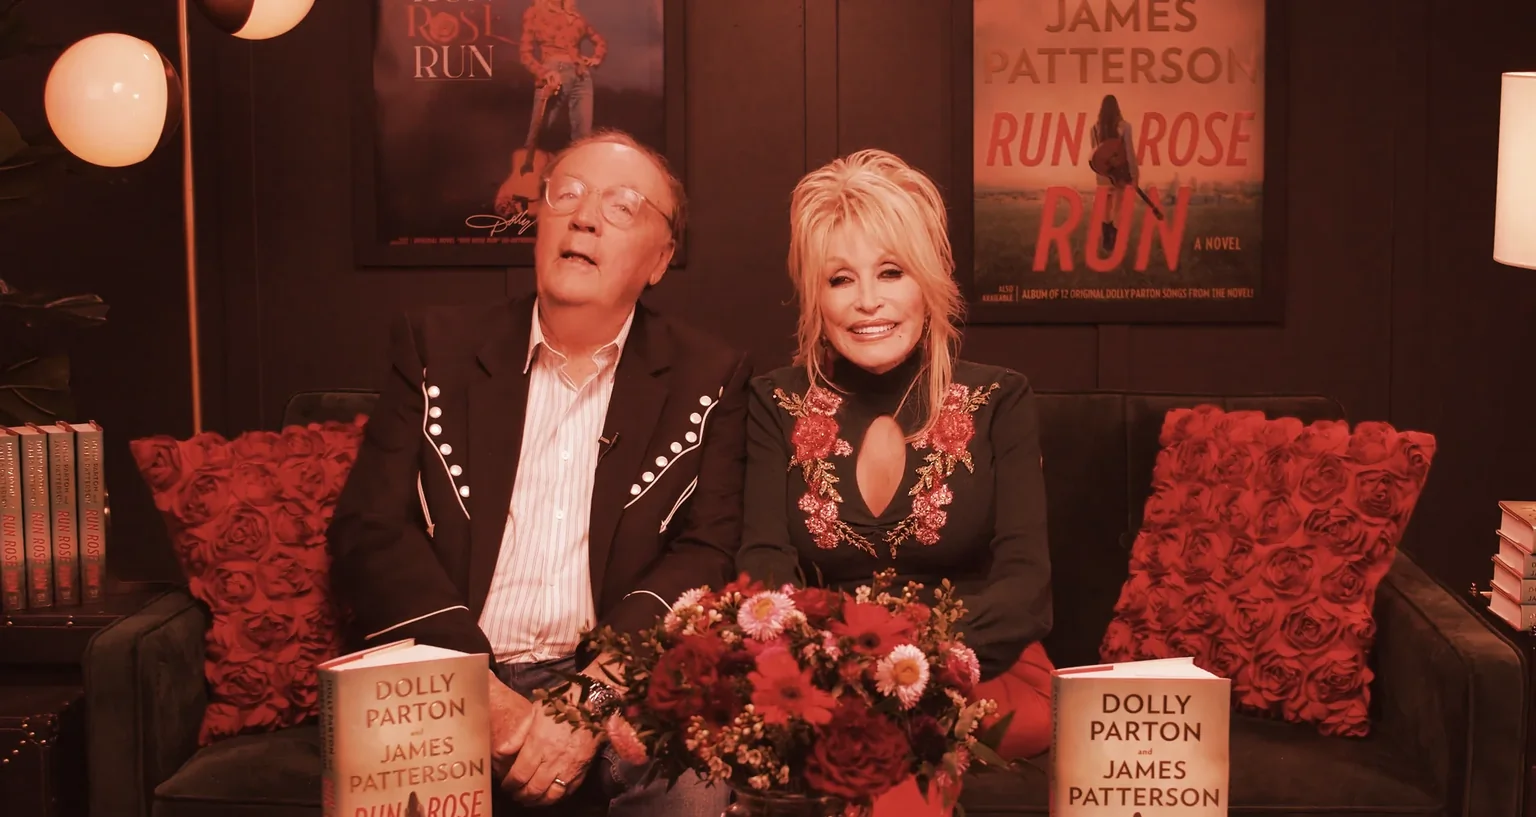 Dolly Parton and James Patterson. Image: Dollyverse